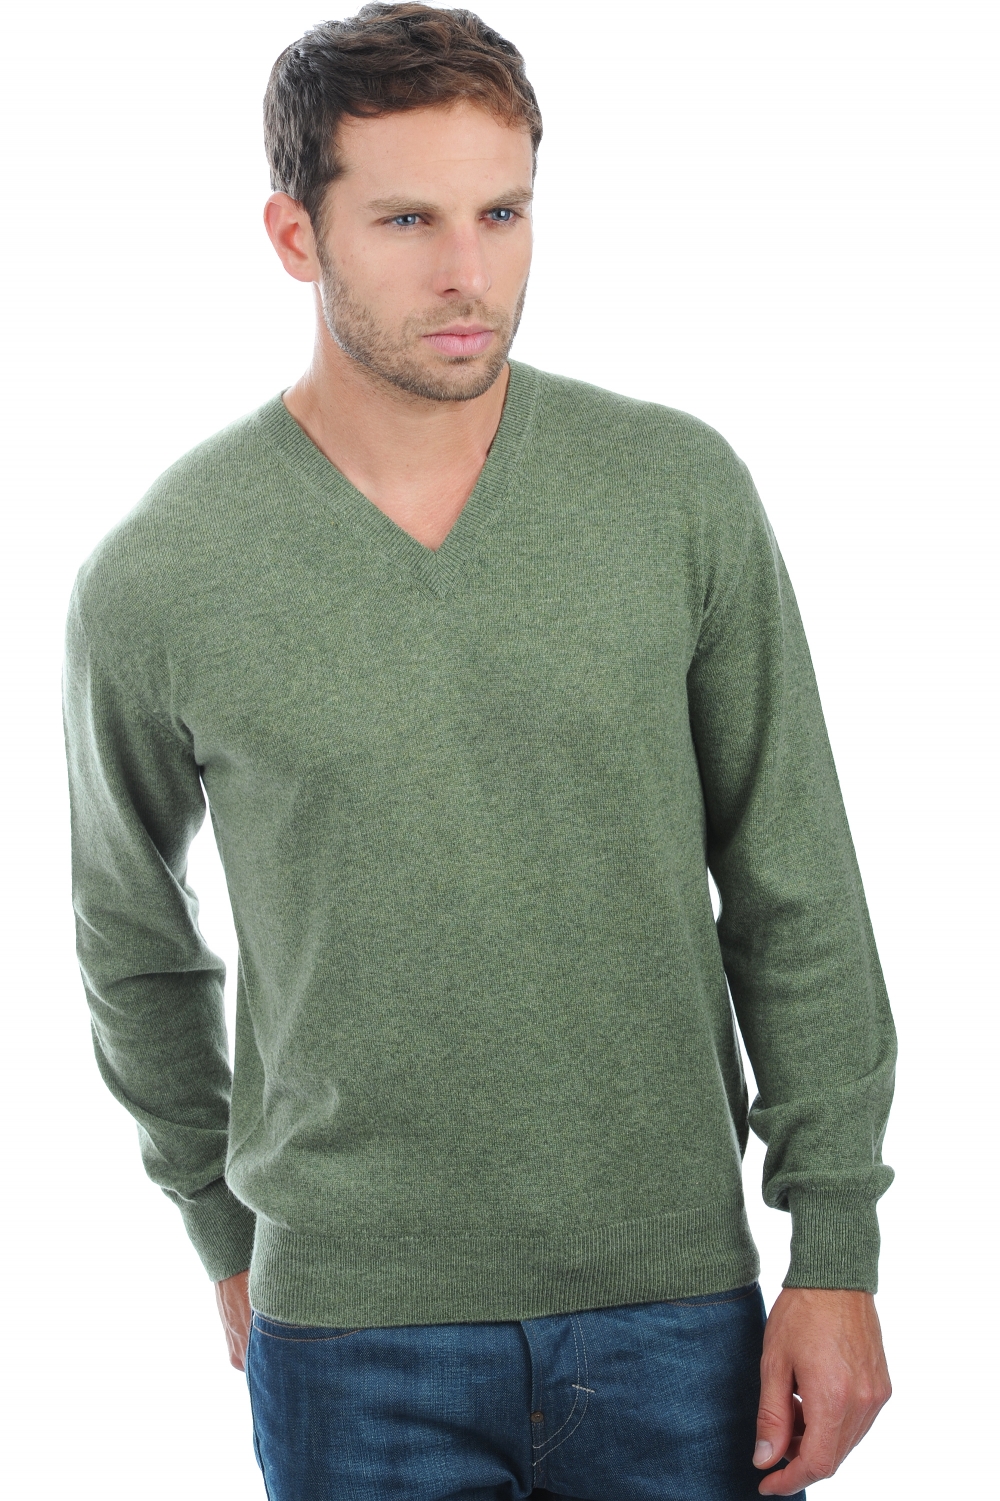 Cachemire pull homme col v gaspard vert chine 2xl